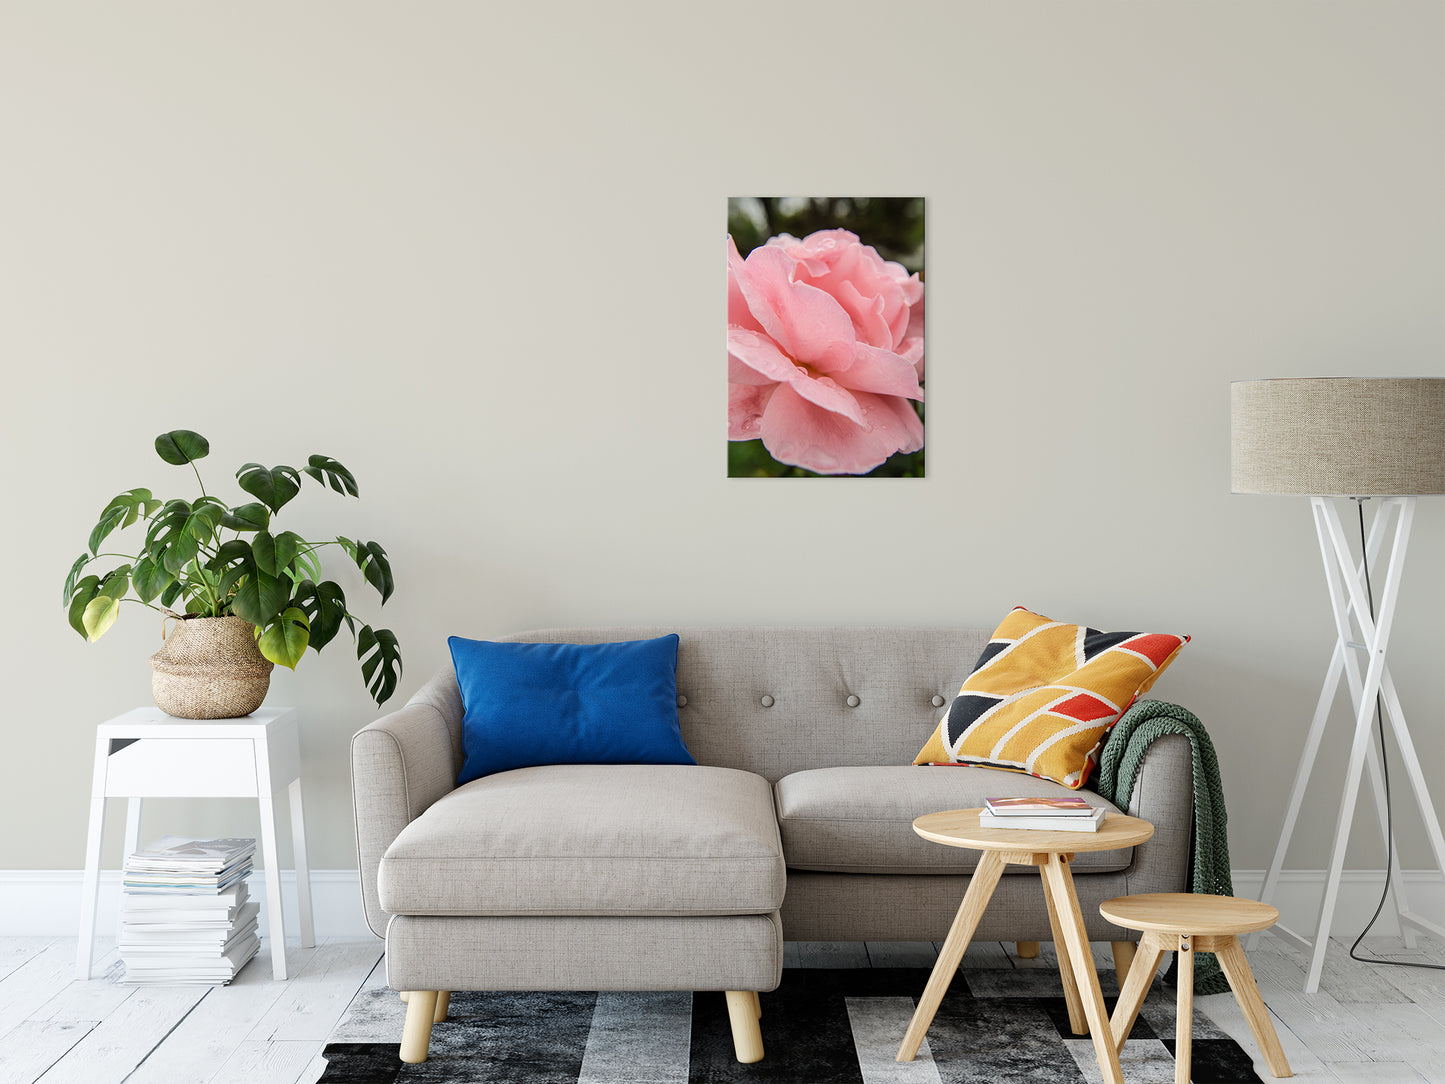 Pink Passion Nature / Floral Photo Fine Art Canvas Wall Art Prints 20" x 24" - PIPAFINEART